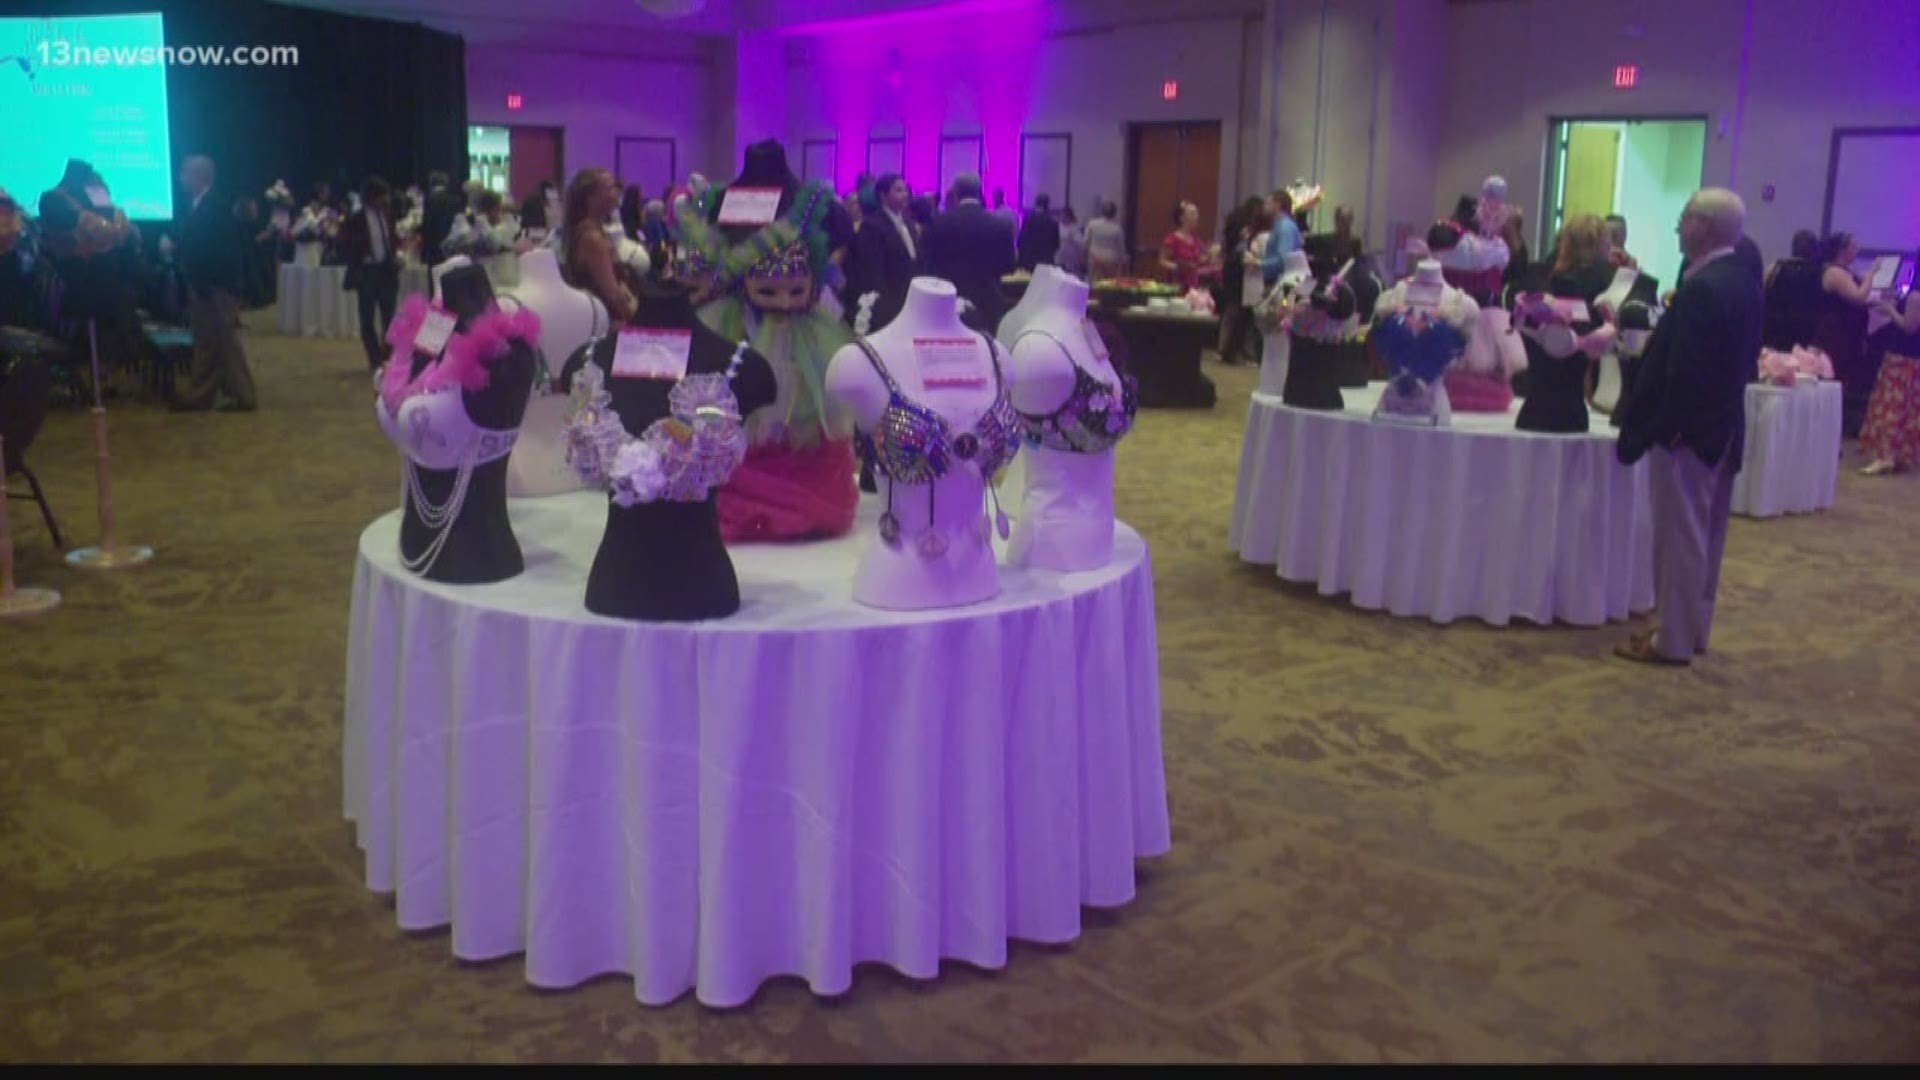 The 11th annual event will feature bras created to raise awareness of breast cancer, to honor those who have won their fight and to remember those who lost their battle.